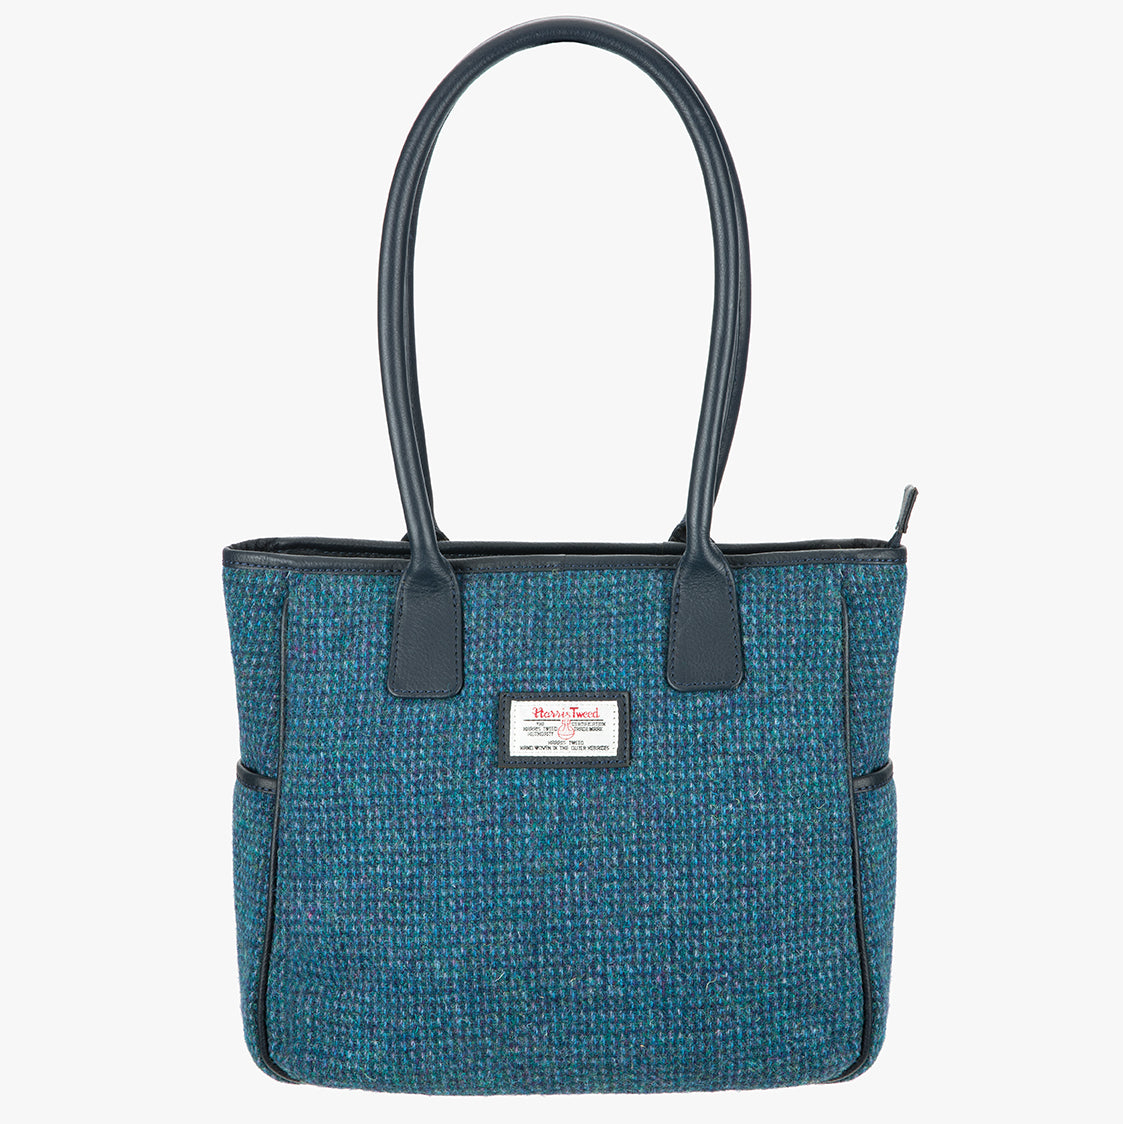 Harris Tweed tote bag in teal, it has a black leather handles that go over the shoulder.  It has pockets on each side of the bag and a Harris Tweed logo on the front.